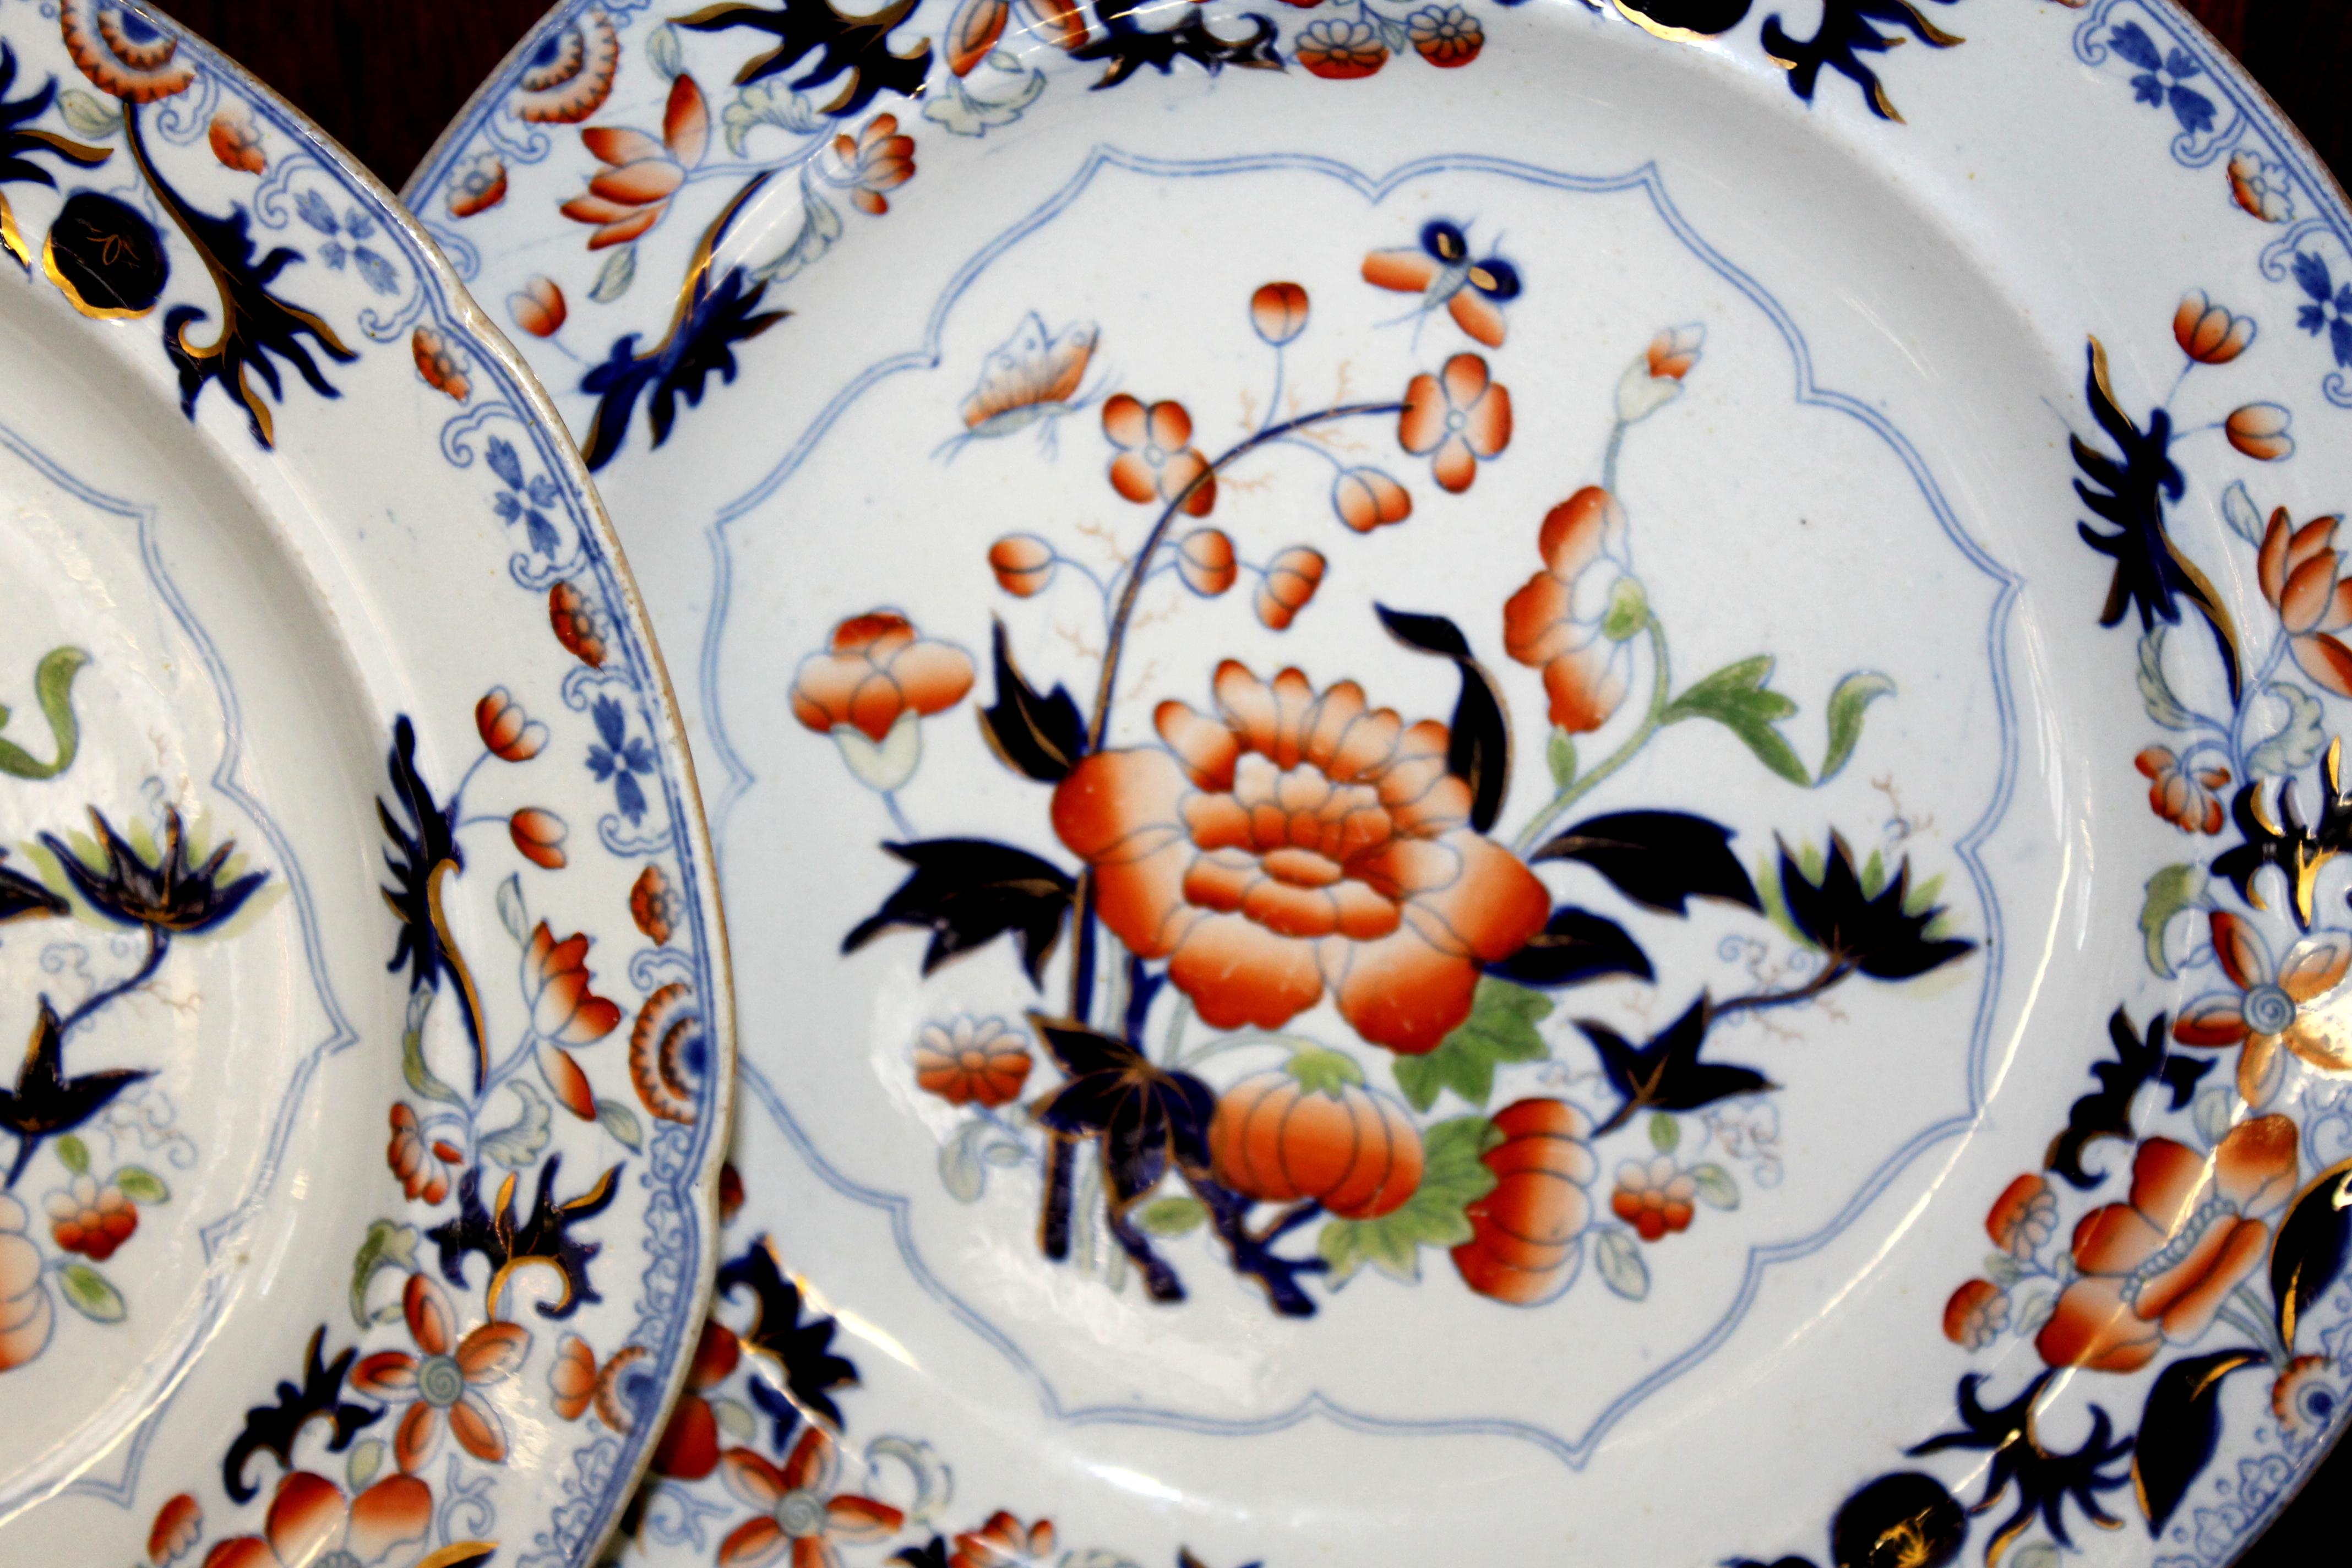 Pair of antique ironstone Imari cabinet plates
Maker's marks for Hicks, Meigh and Johnson
Shelton, Hanley
Staffordshire
Please note handsome, early design. Period plates. Mint condition.
 